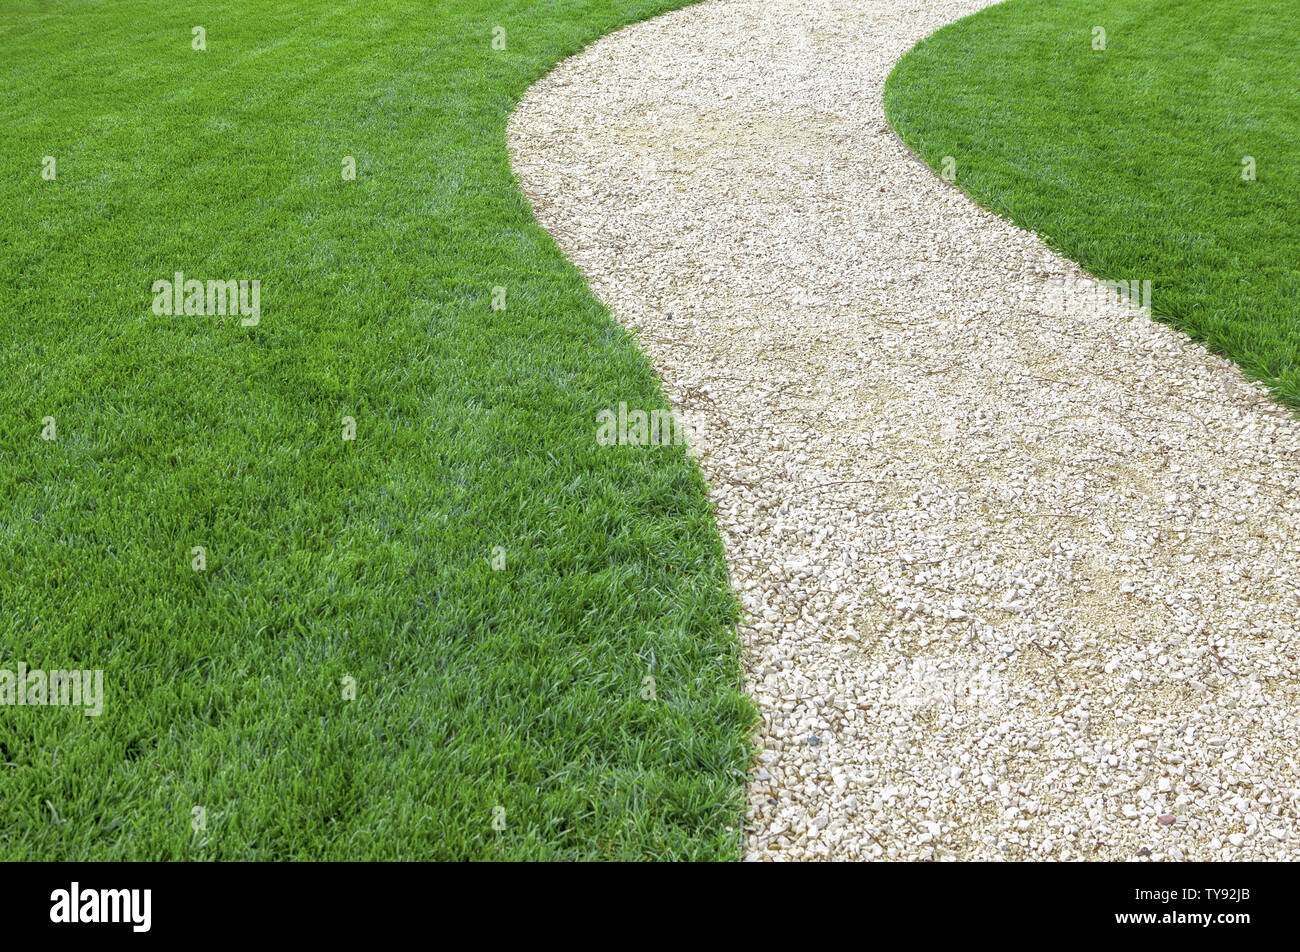 Curved garden stone path with fresh green cultivated lawn in summer Stock Photo